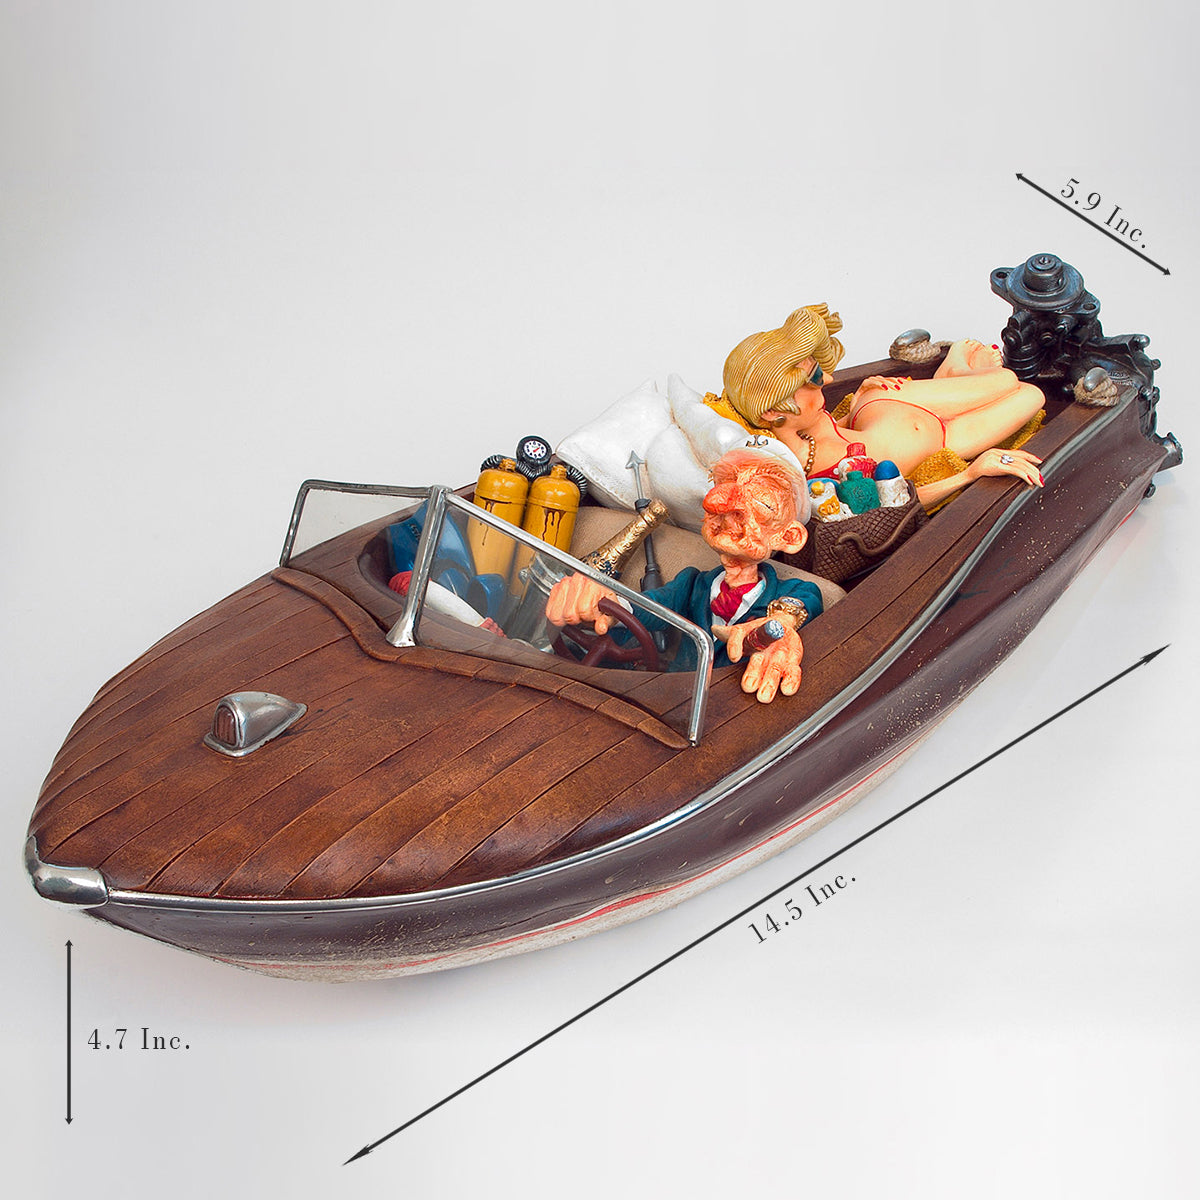 Le Playboy Speedboat - Designer Studio - Quirky objects